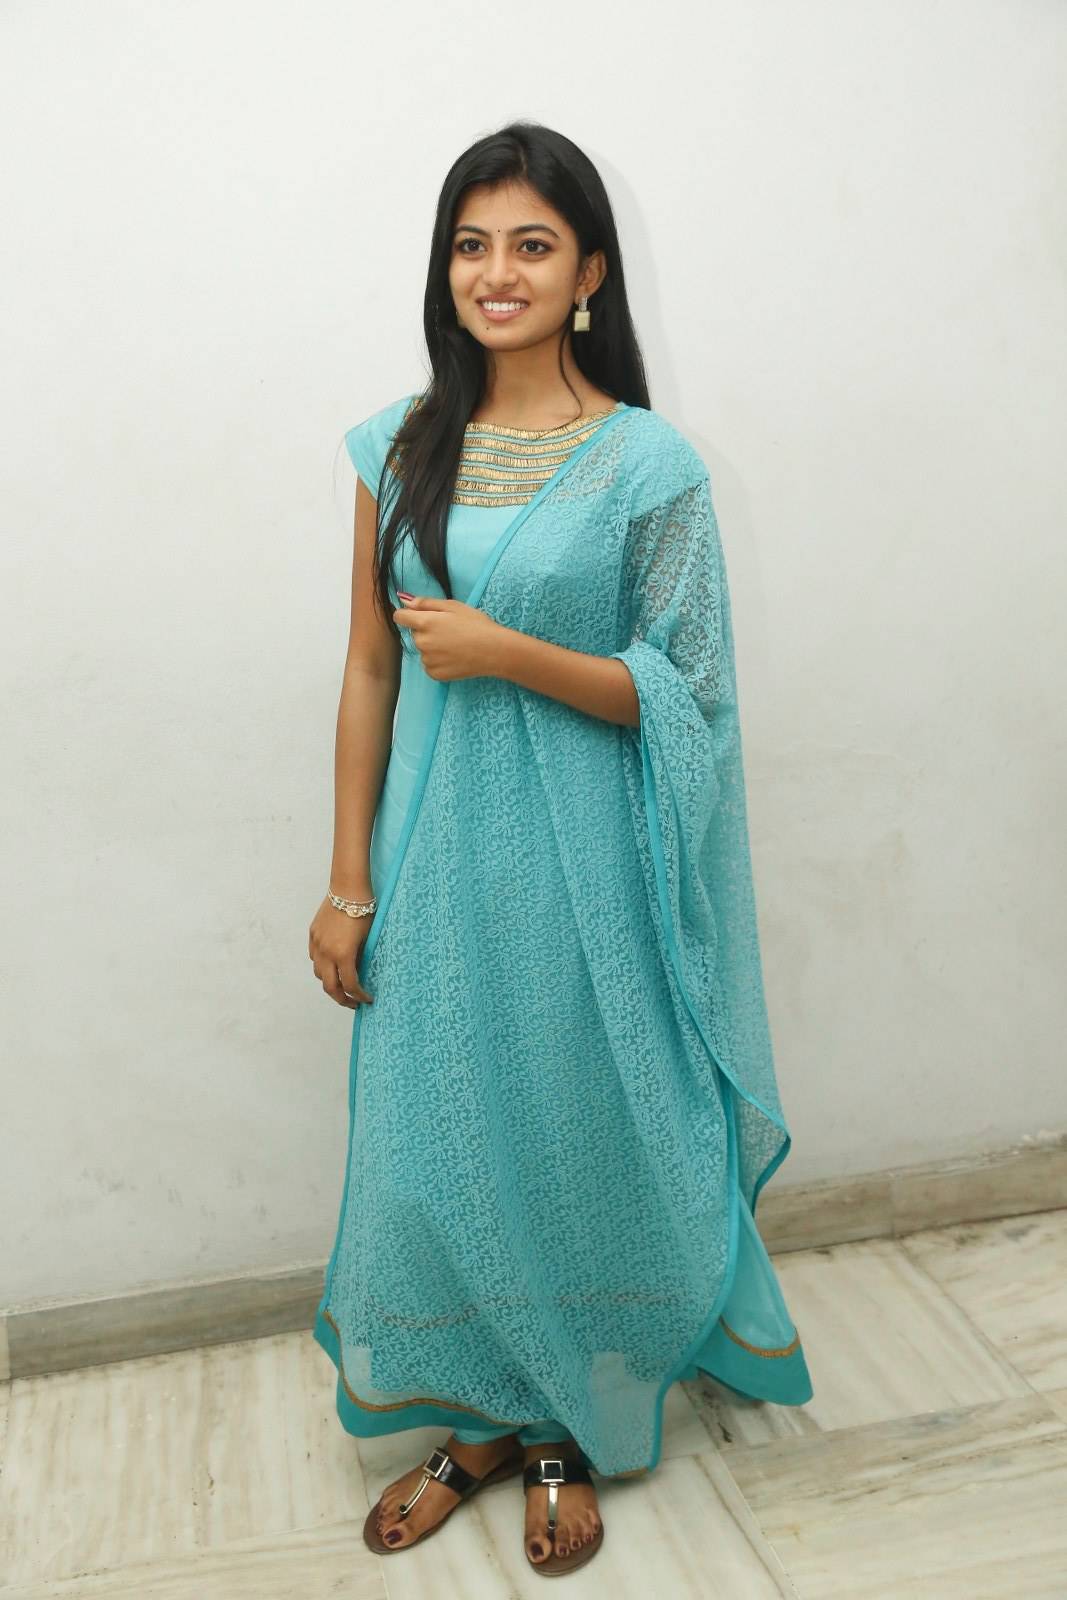 Actress Anandhi Photos At Movie Trailer Launch In Green Dress